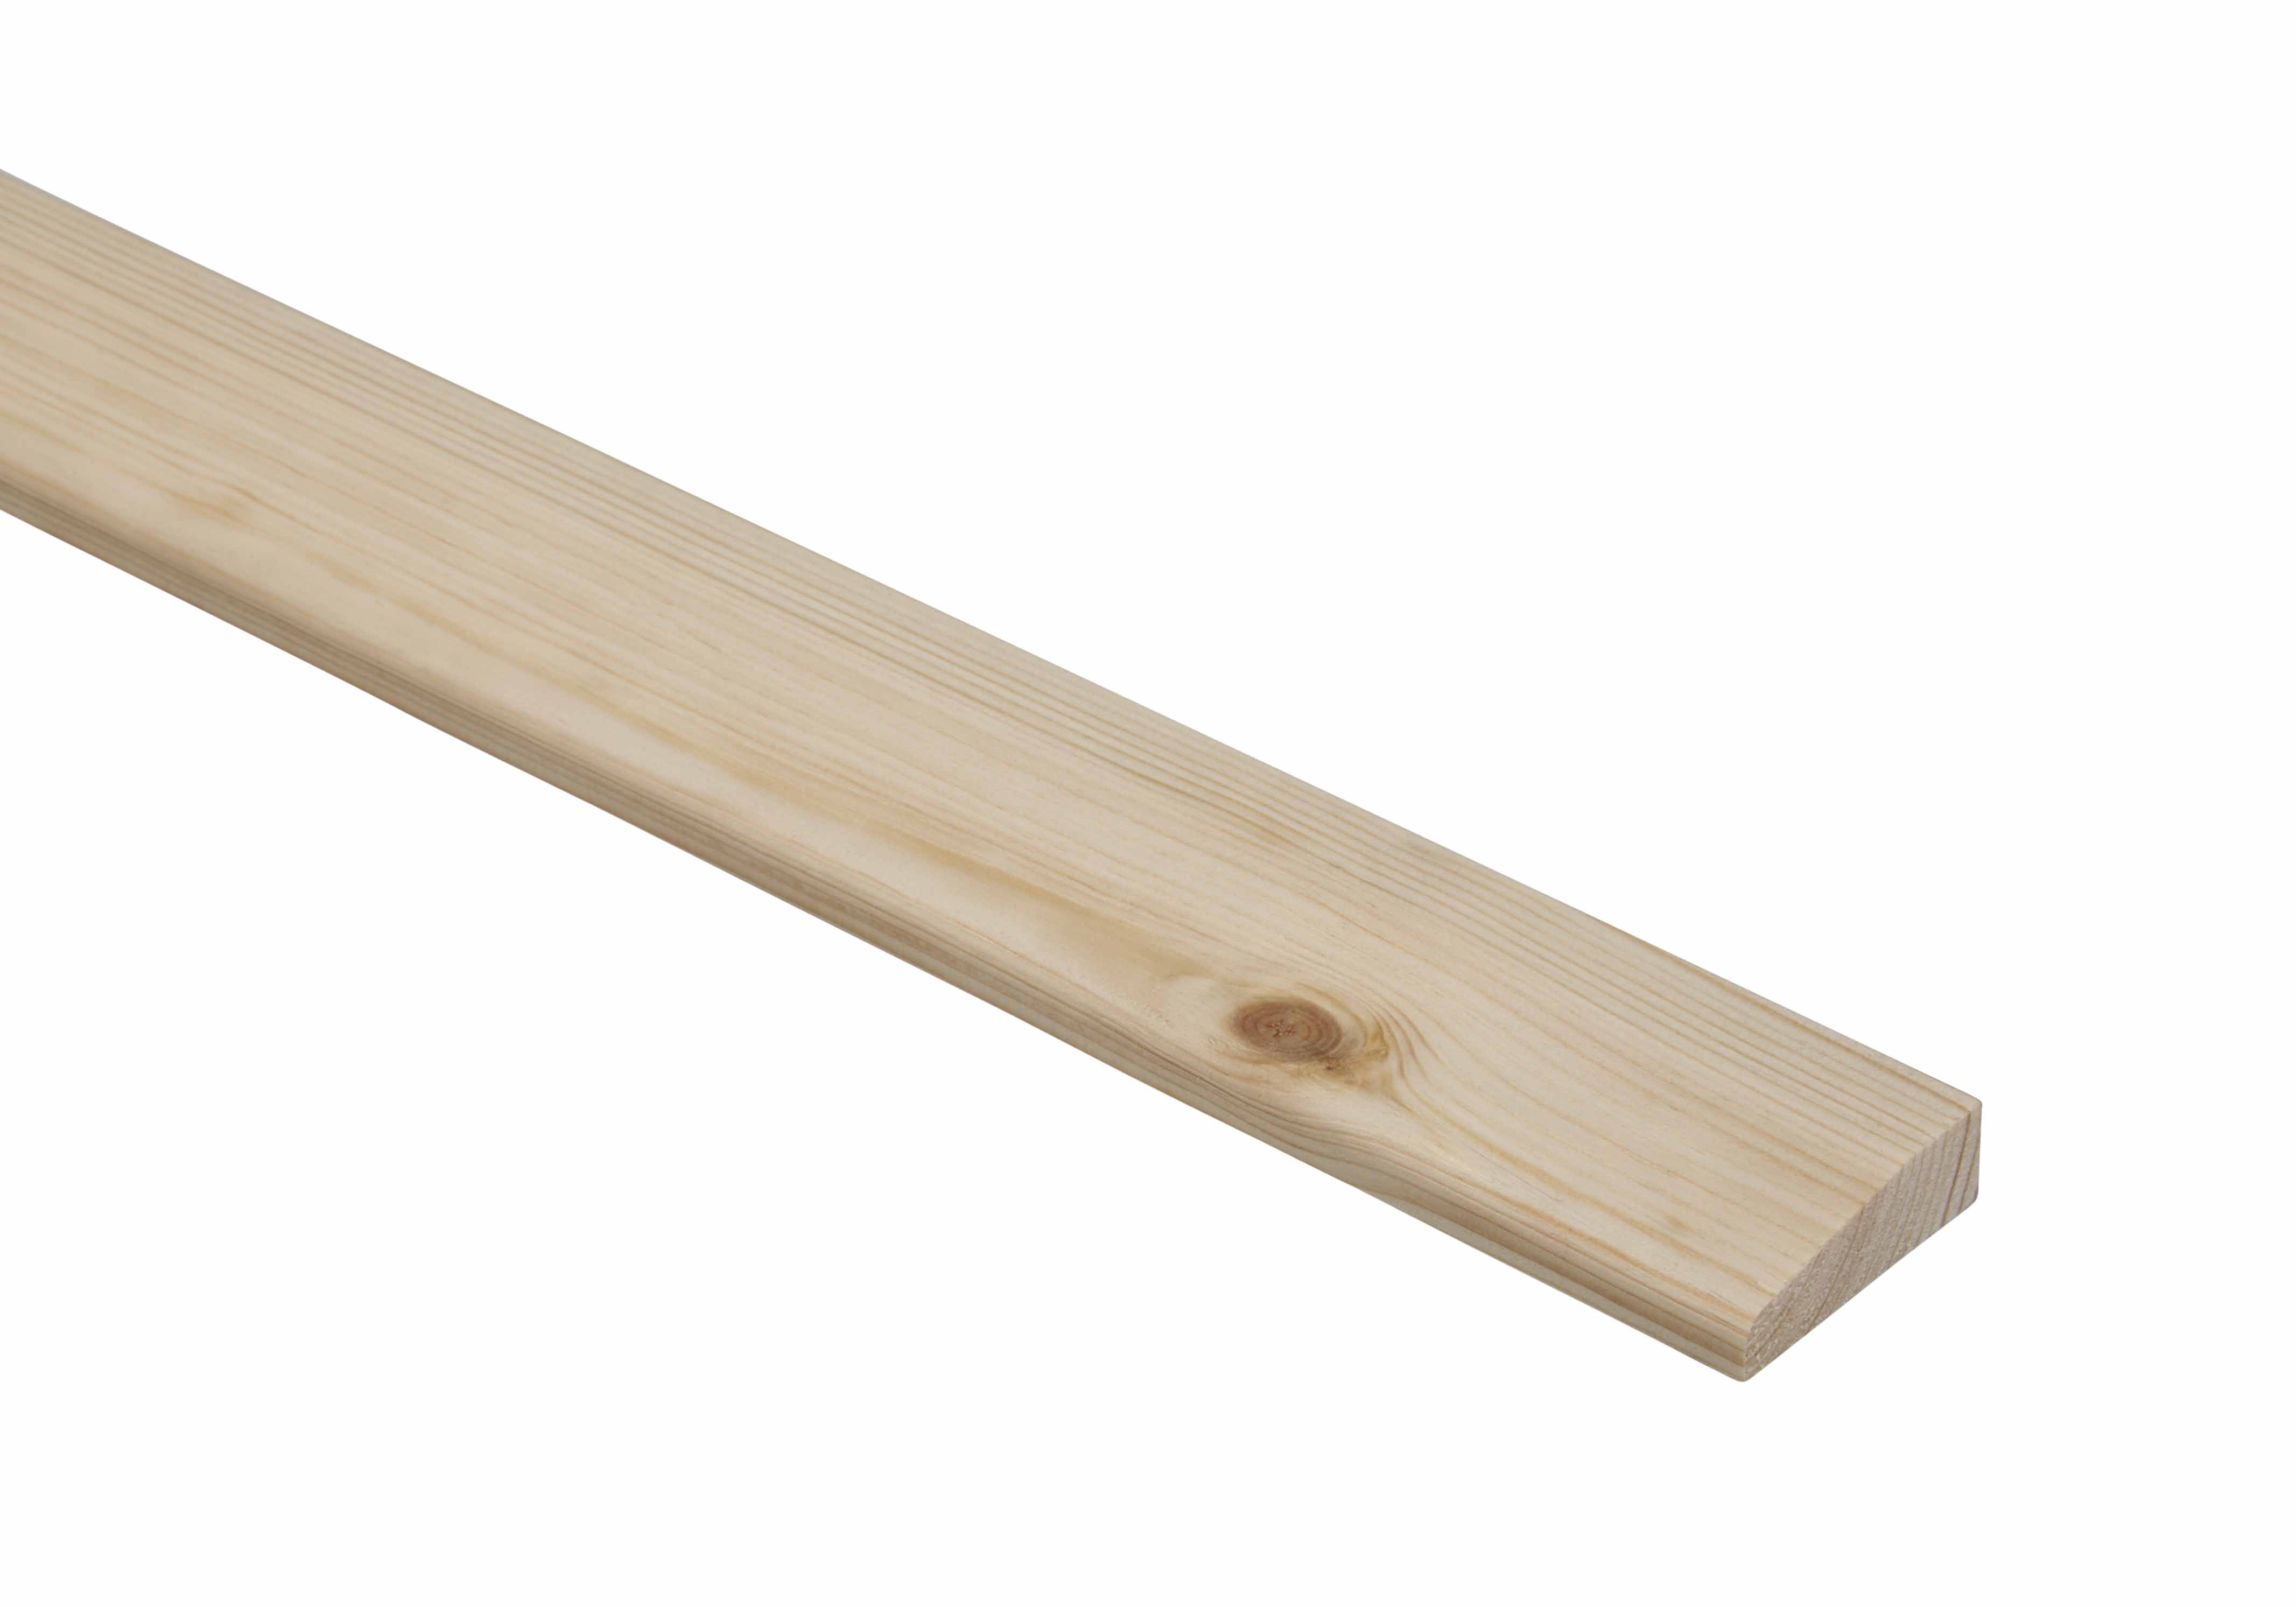 10 Pine Chamfered Architrave Mouldings 15 x 71 x 2400mm